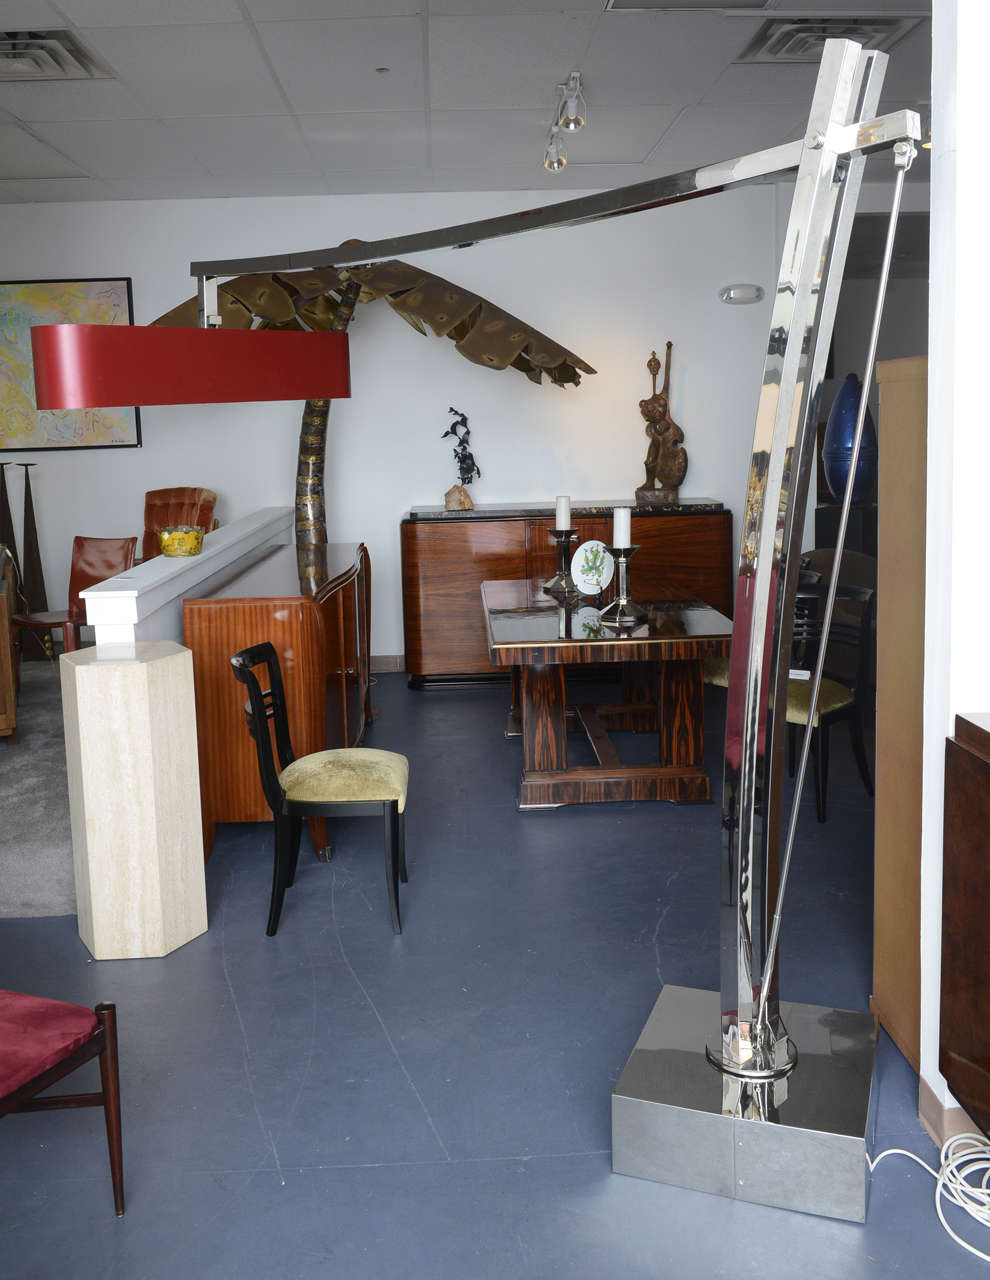 Unique monumental sculptural lamp, balanced proportions, exceptional shape design for this imposing Mid century chrome floor lamp.
The Hermes red lacquered sheet metal shade is hanging at the end of a long articulated arm. Halogens lamps (250